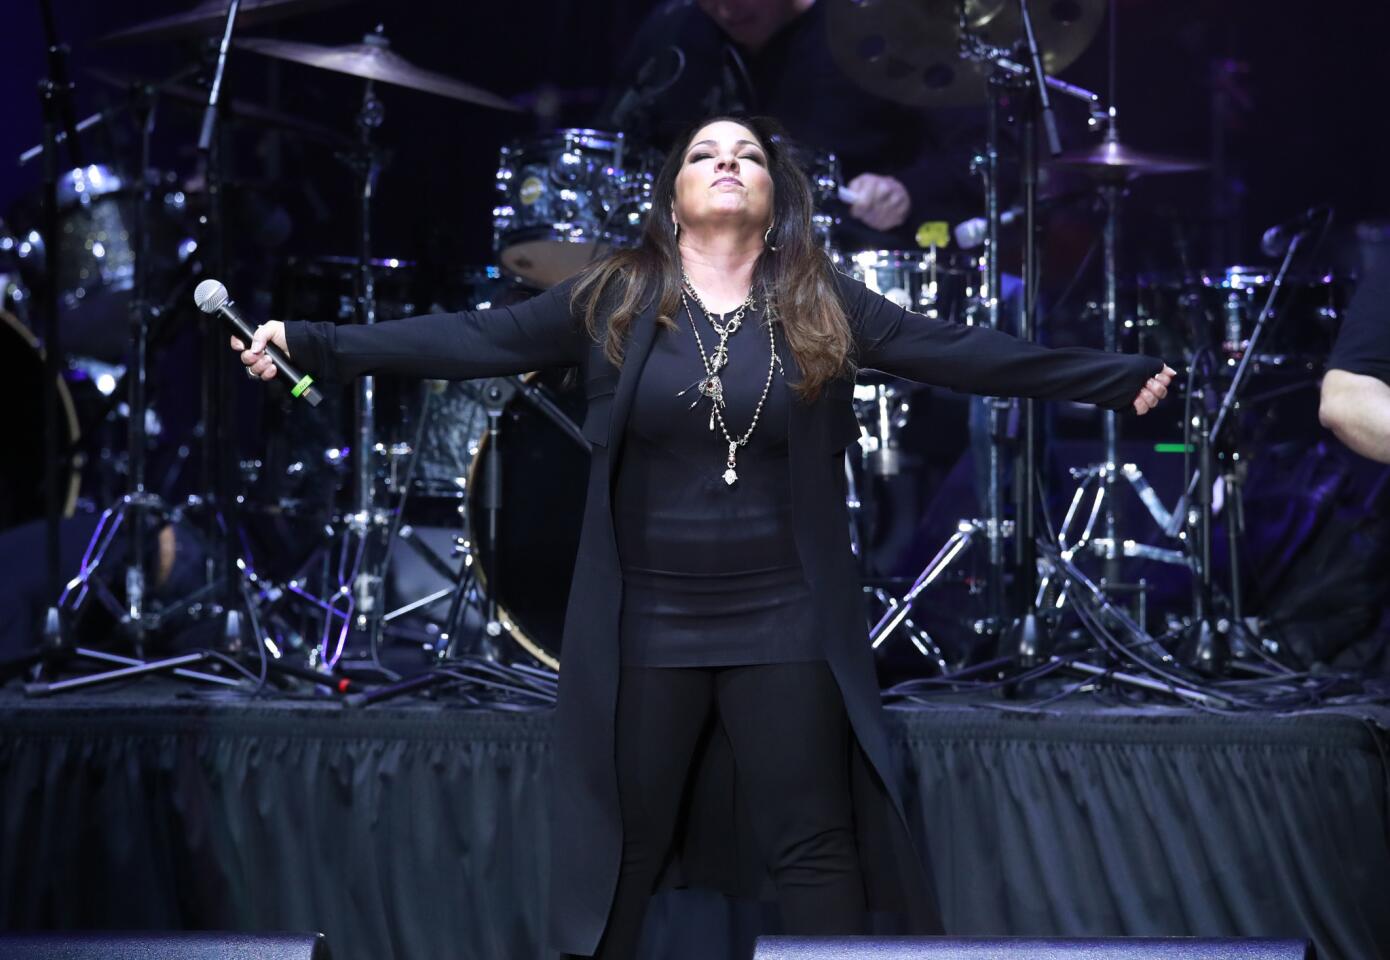 Singer-songwriter Gloria Estefan performs Nov. 1, 2017, at Wintrust Arena in Chicago during a community event related to the Obama Foundation Summit.